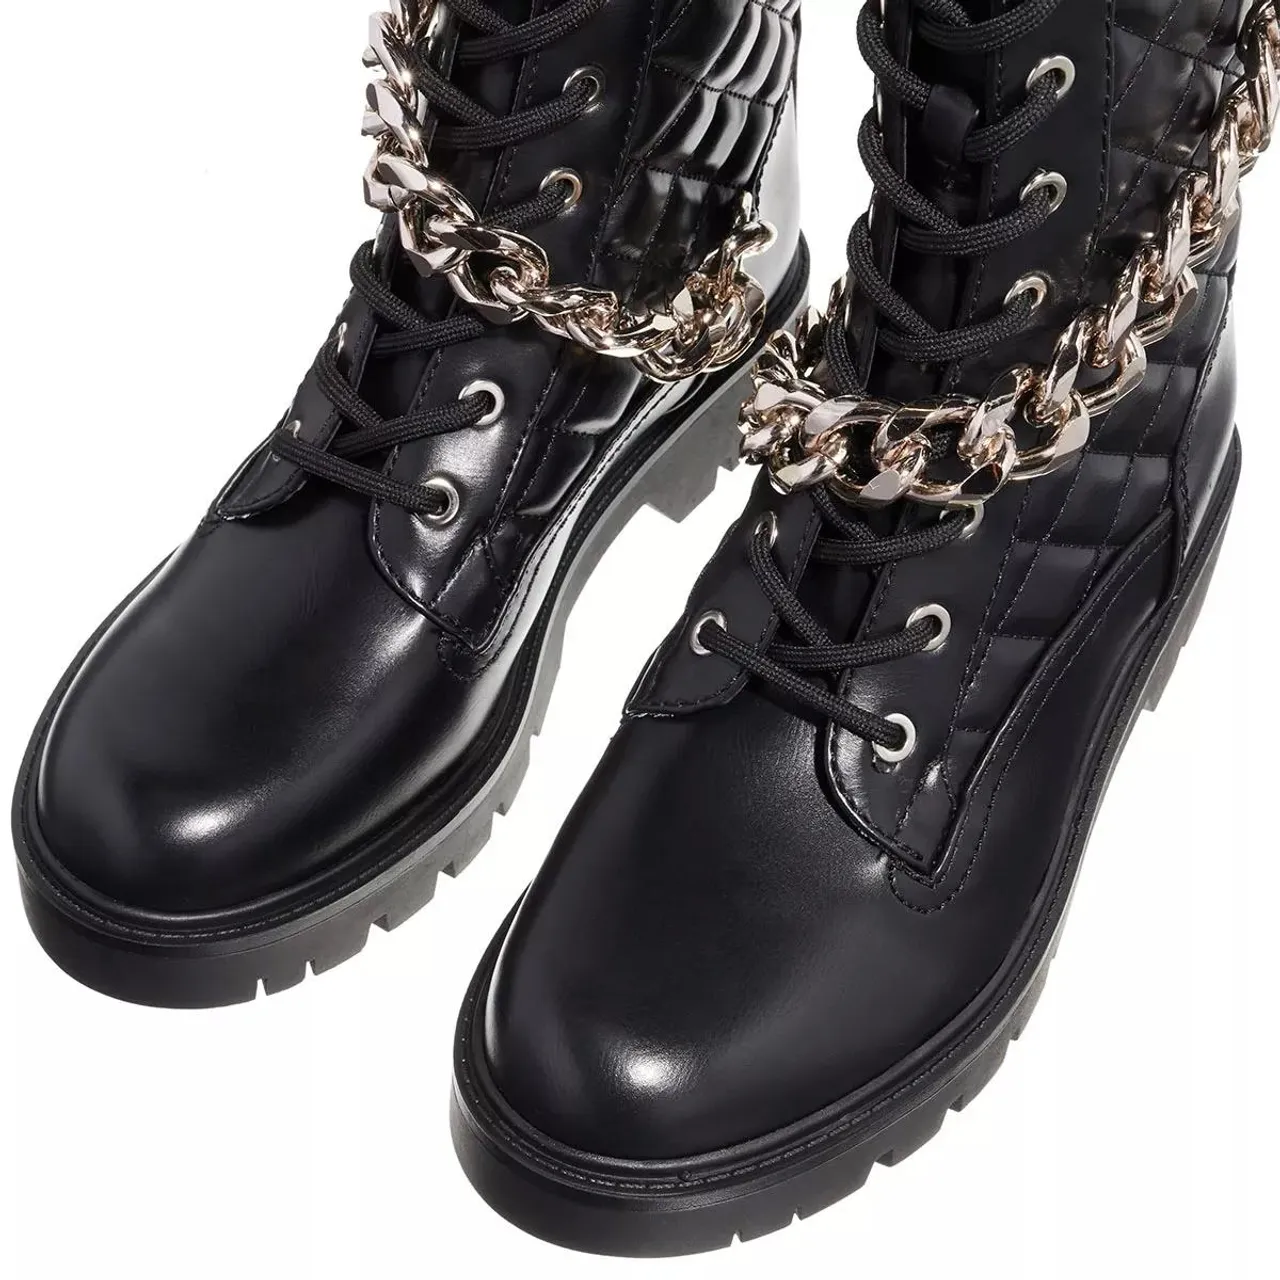 Guess Boots & Stiefeletten - Riplei Quilted Biker Boots